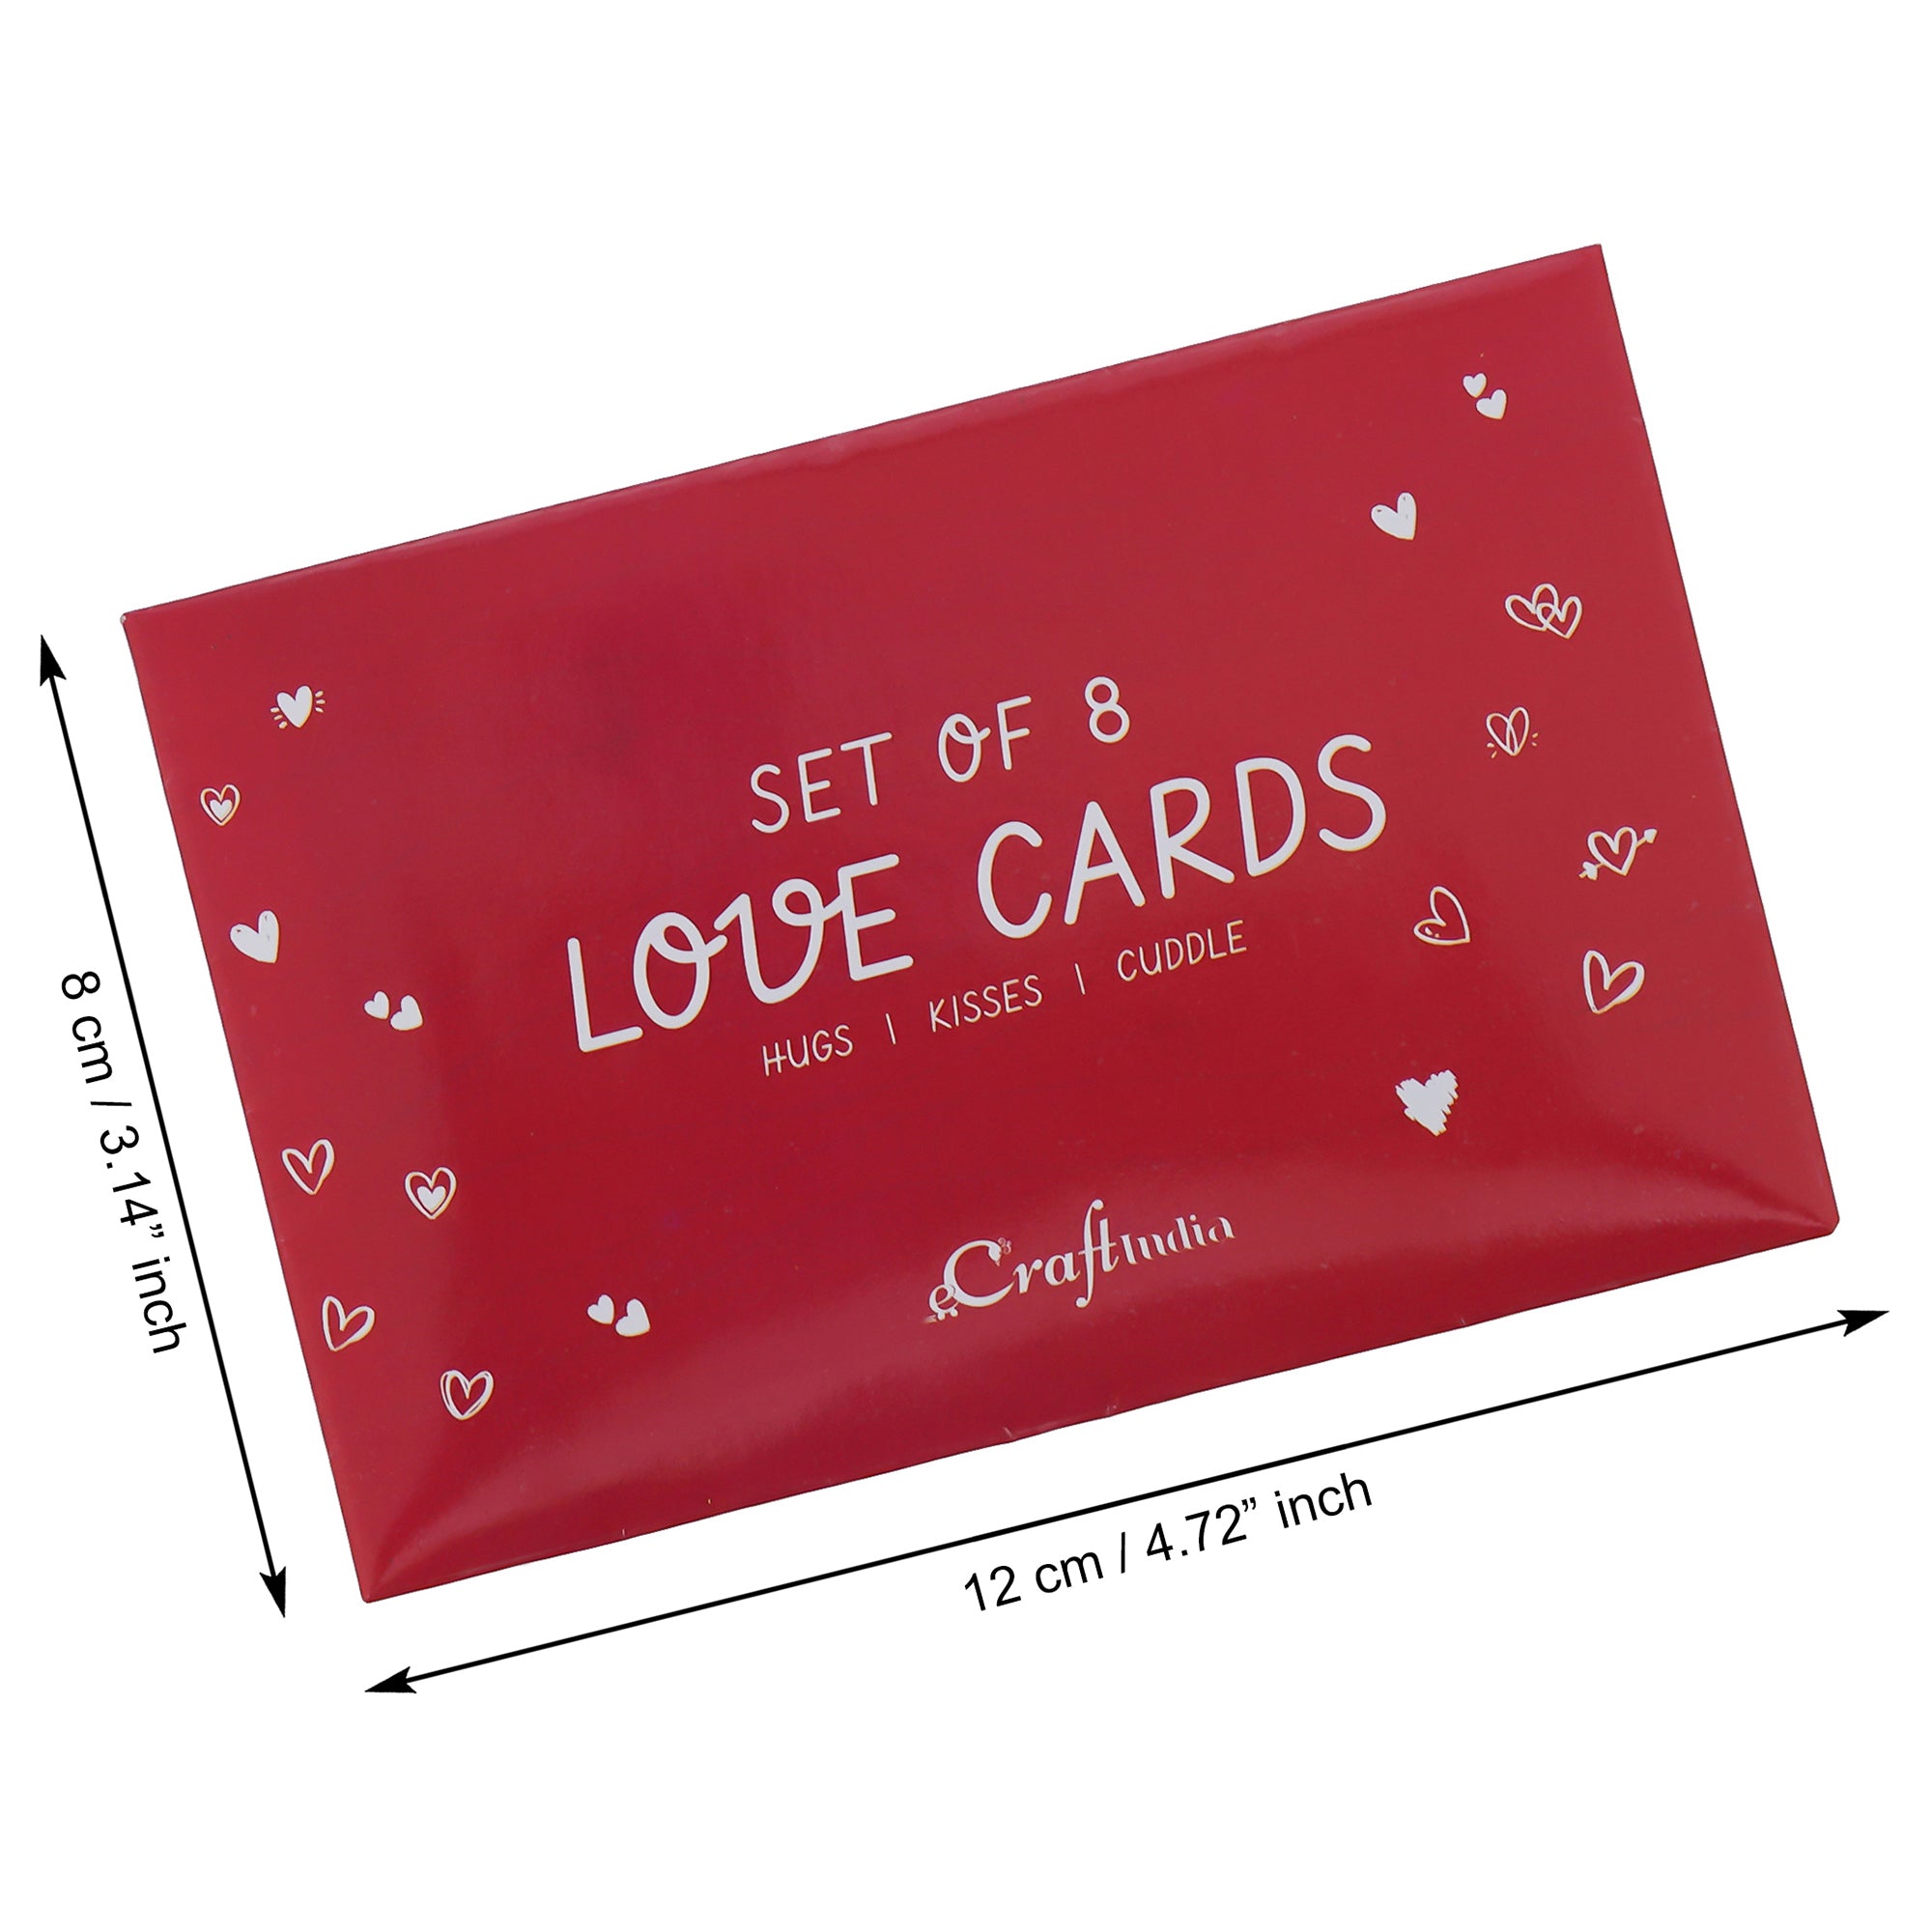 Valentine Combo of Pack of 8 Love Gift Cards, Red Gift Box with Teddy & Roses, "20 Reasons Why I Love You" Printed on Little Red Hearts Decorative Wooden Gift Set Box 2